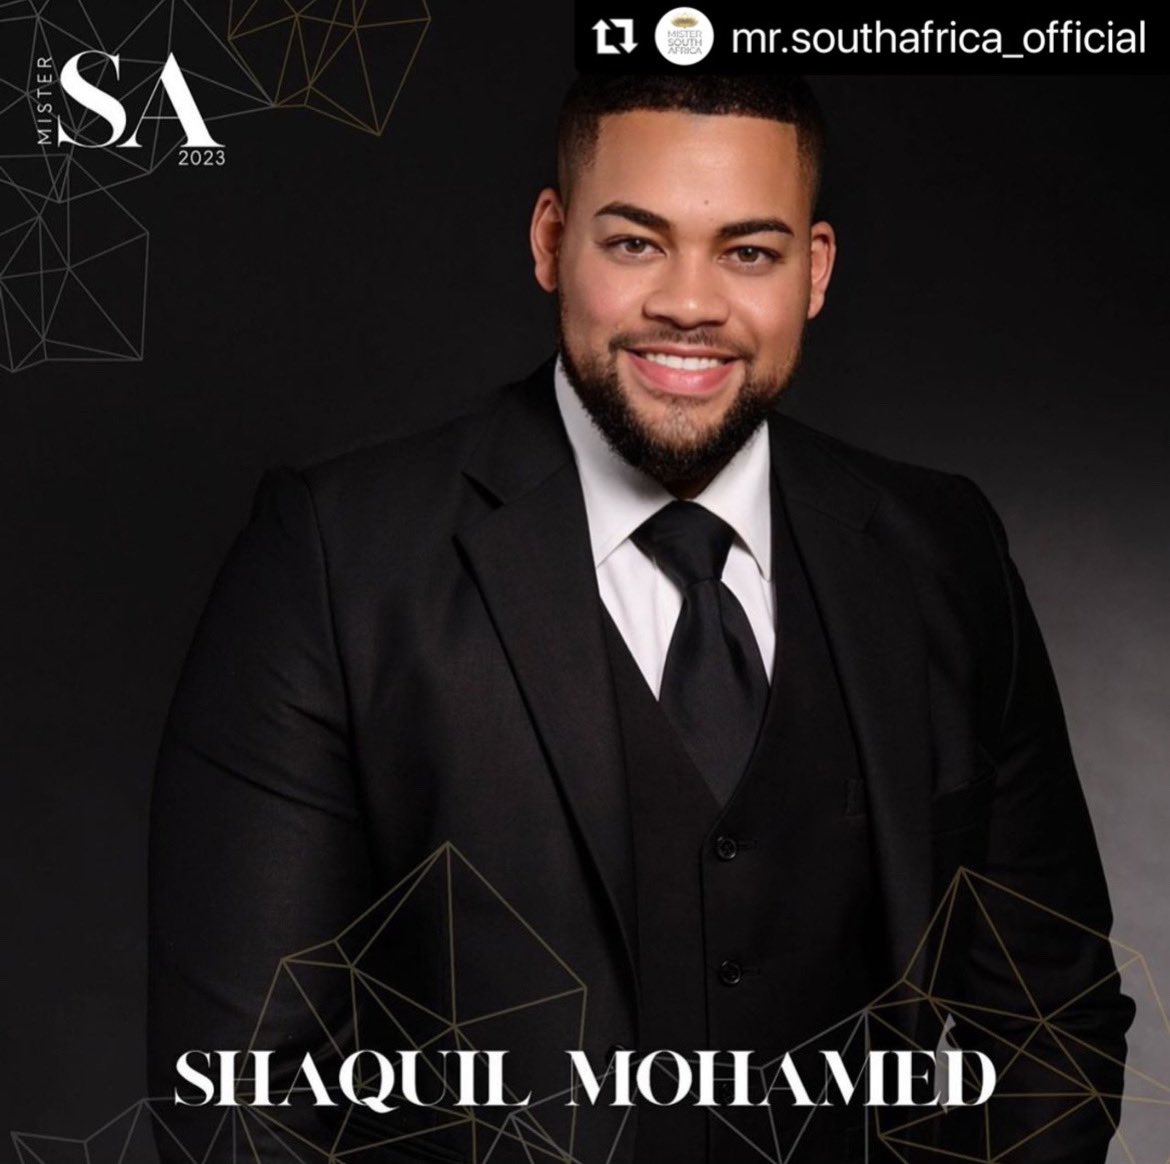 Please do me a favour and vote for me to become the 2023/24 Mr South Africa 🇿🇦 

Thank you in advance ❤️

#Mrsa2023 #mrsouthafrica 

(R2 per vote, you can vote as many times as you like) vote through the link 

mrsa.co.za/product-page/m…